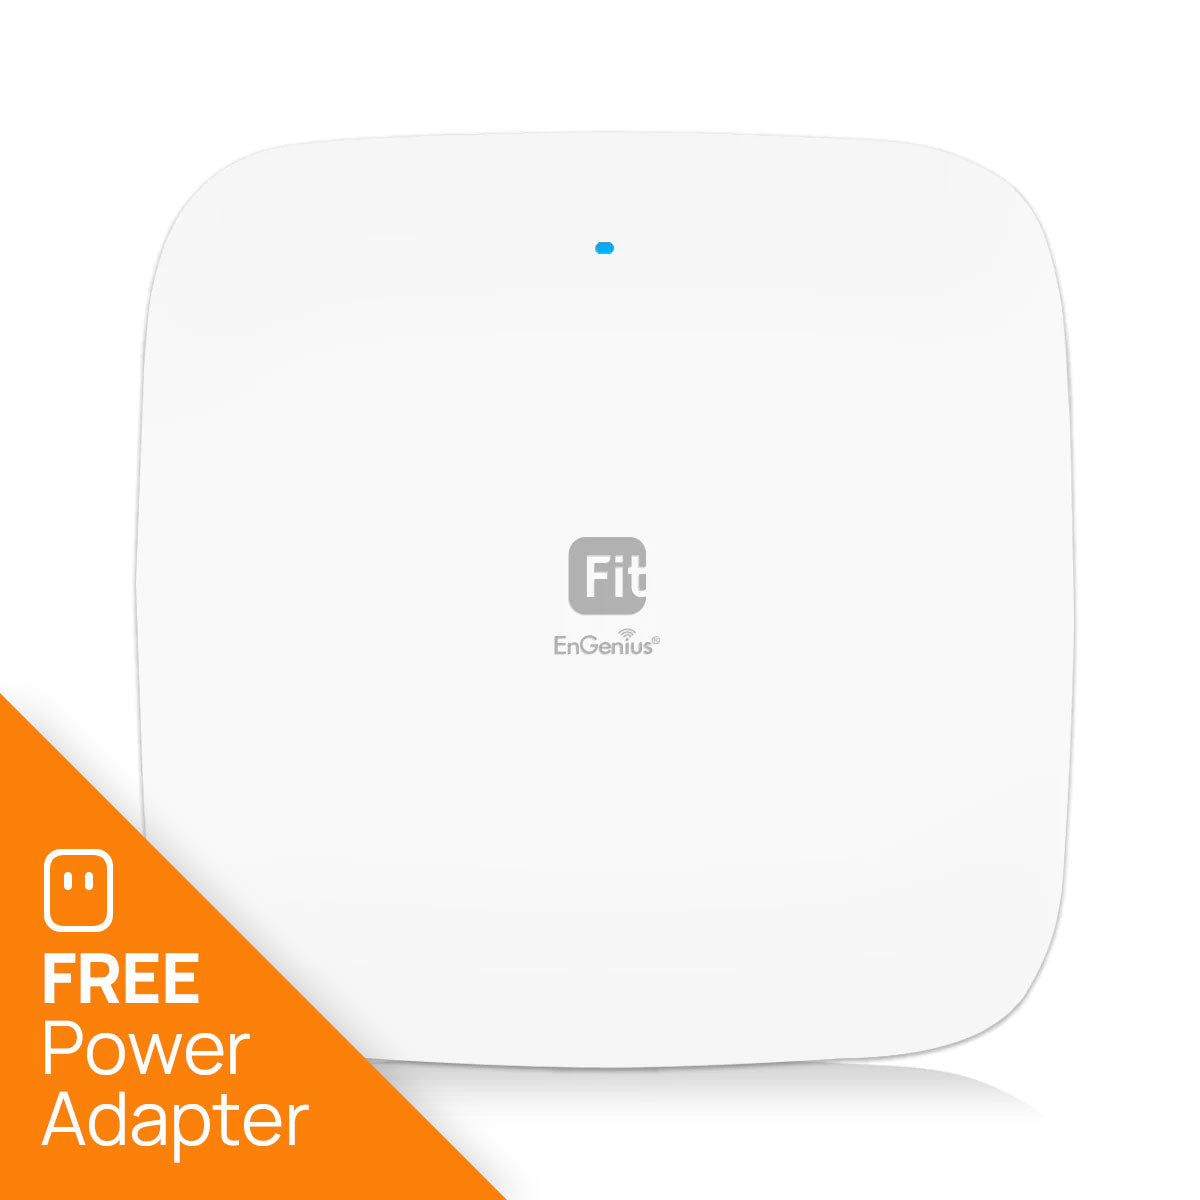 EWS356-FIT: EnGenius Fit 2×2 Indoor Wireless Wi-Fi 6 Access Point with Adapter ($10 Value)